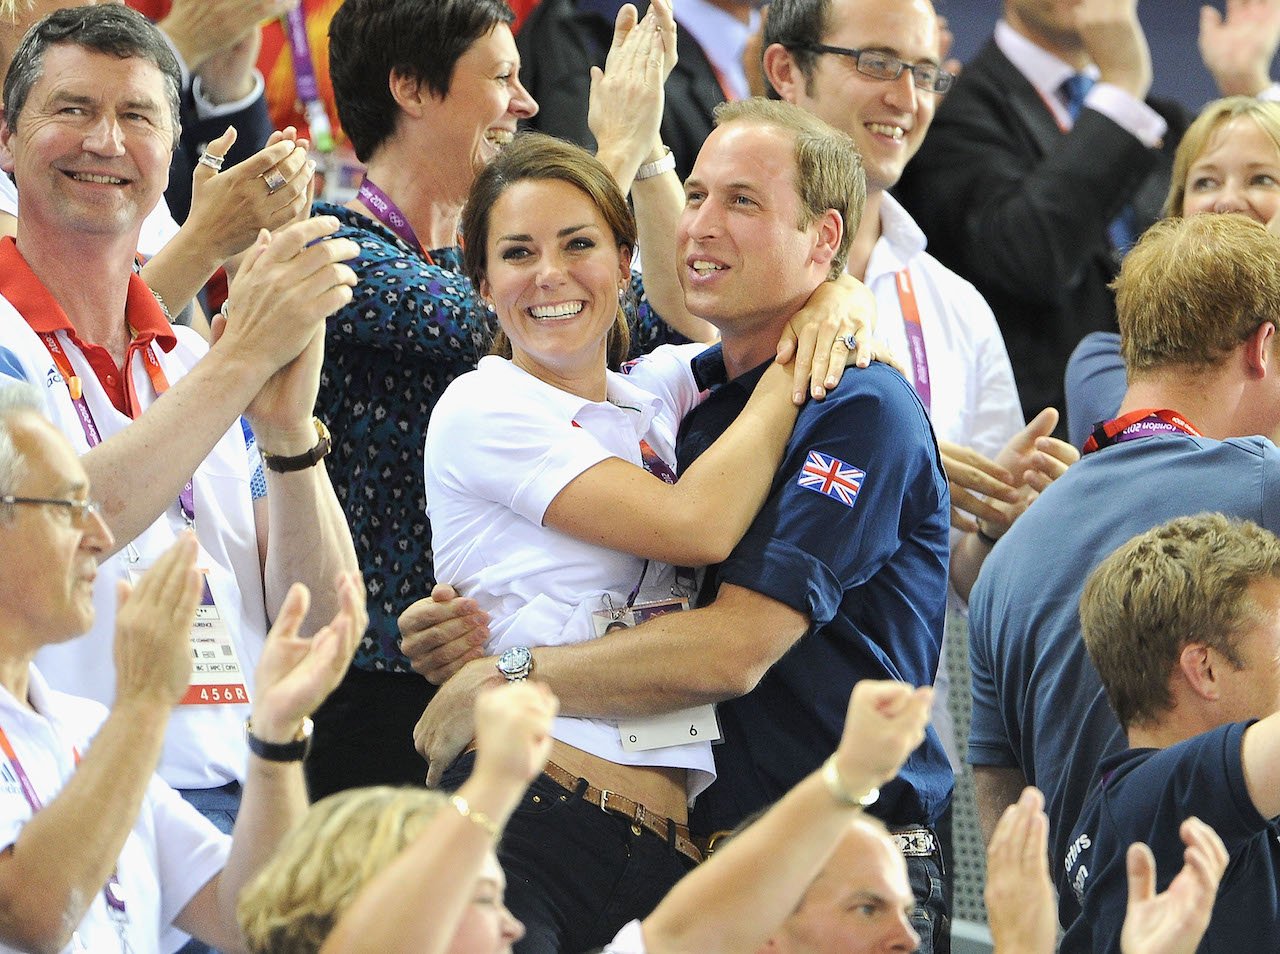 Prince William and Kate Middleton embrace on Day 6 of the London 2012 Olympic Games at Velodrome on August 2, 2012, in London, England.